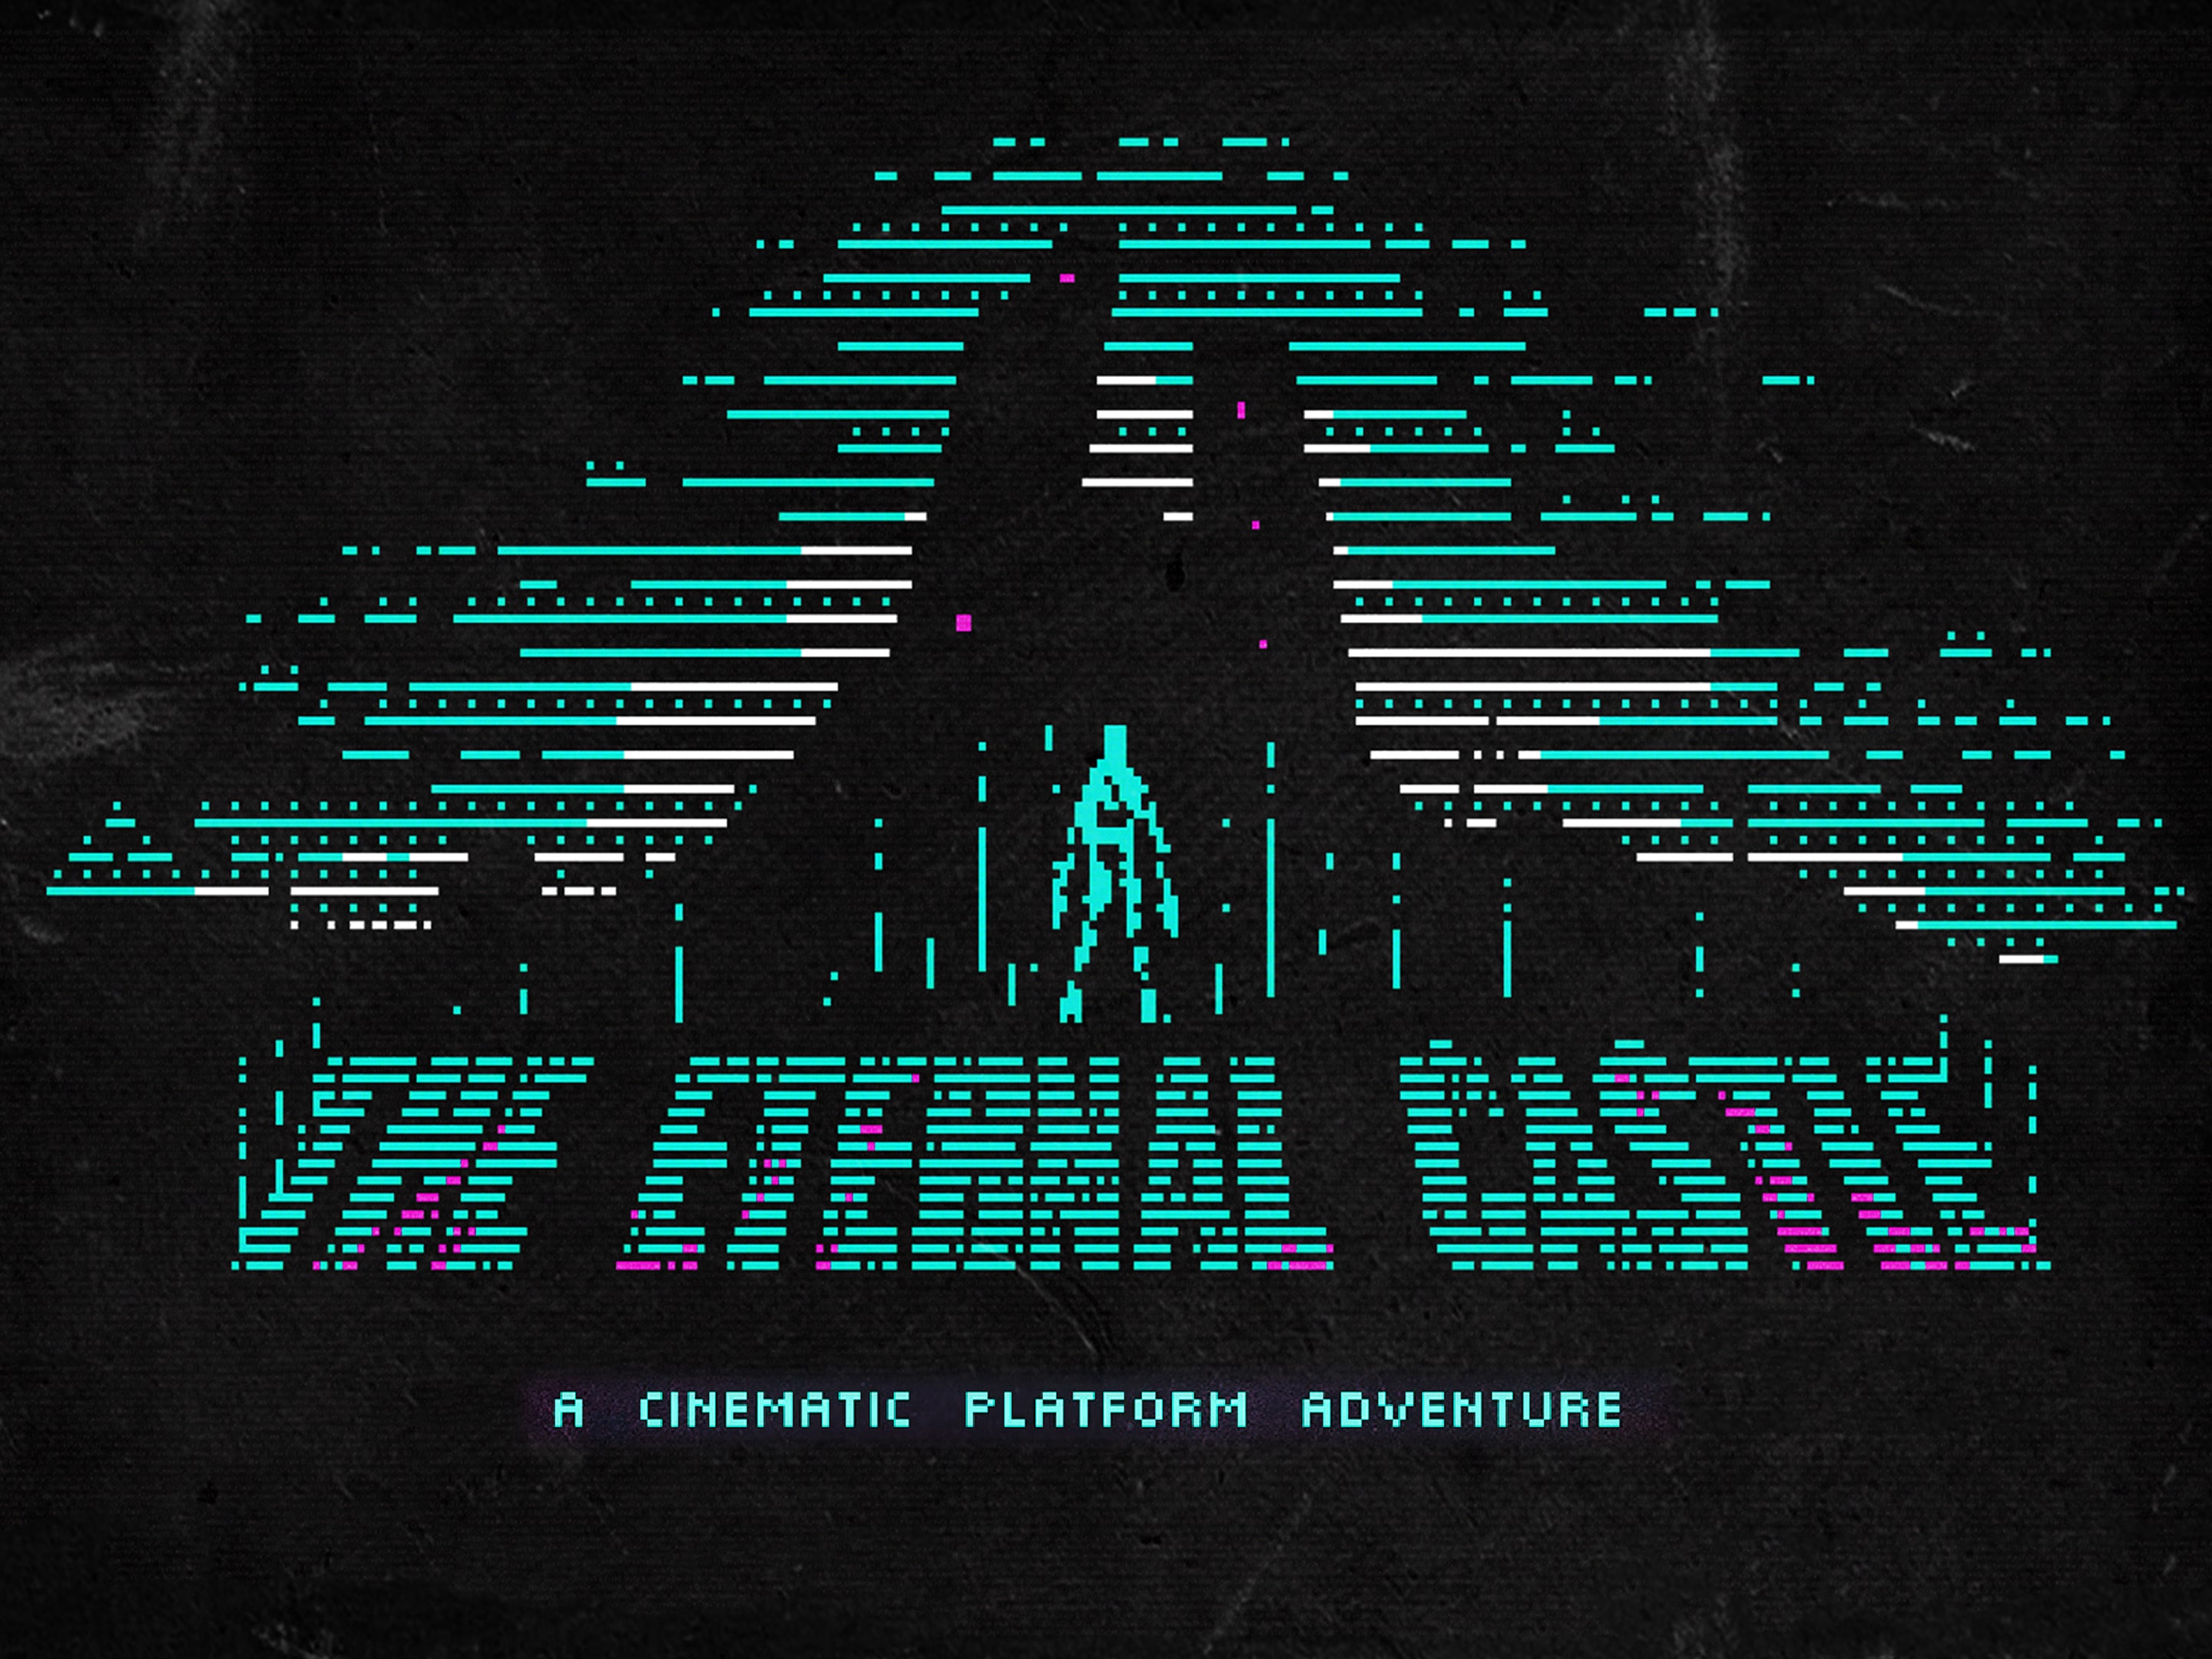 The Eternal Castle [Remastered]